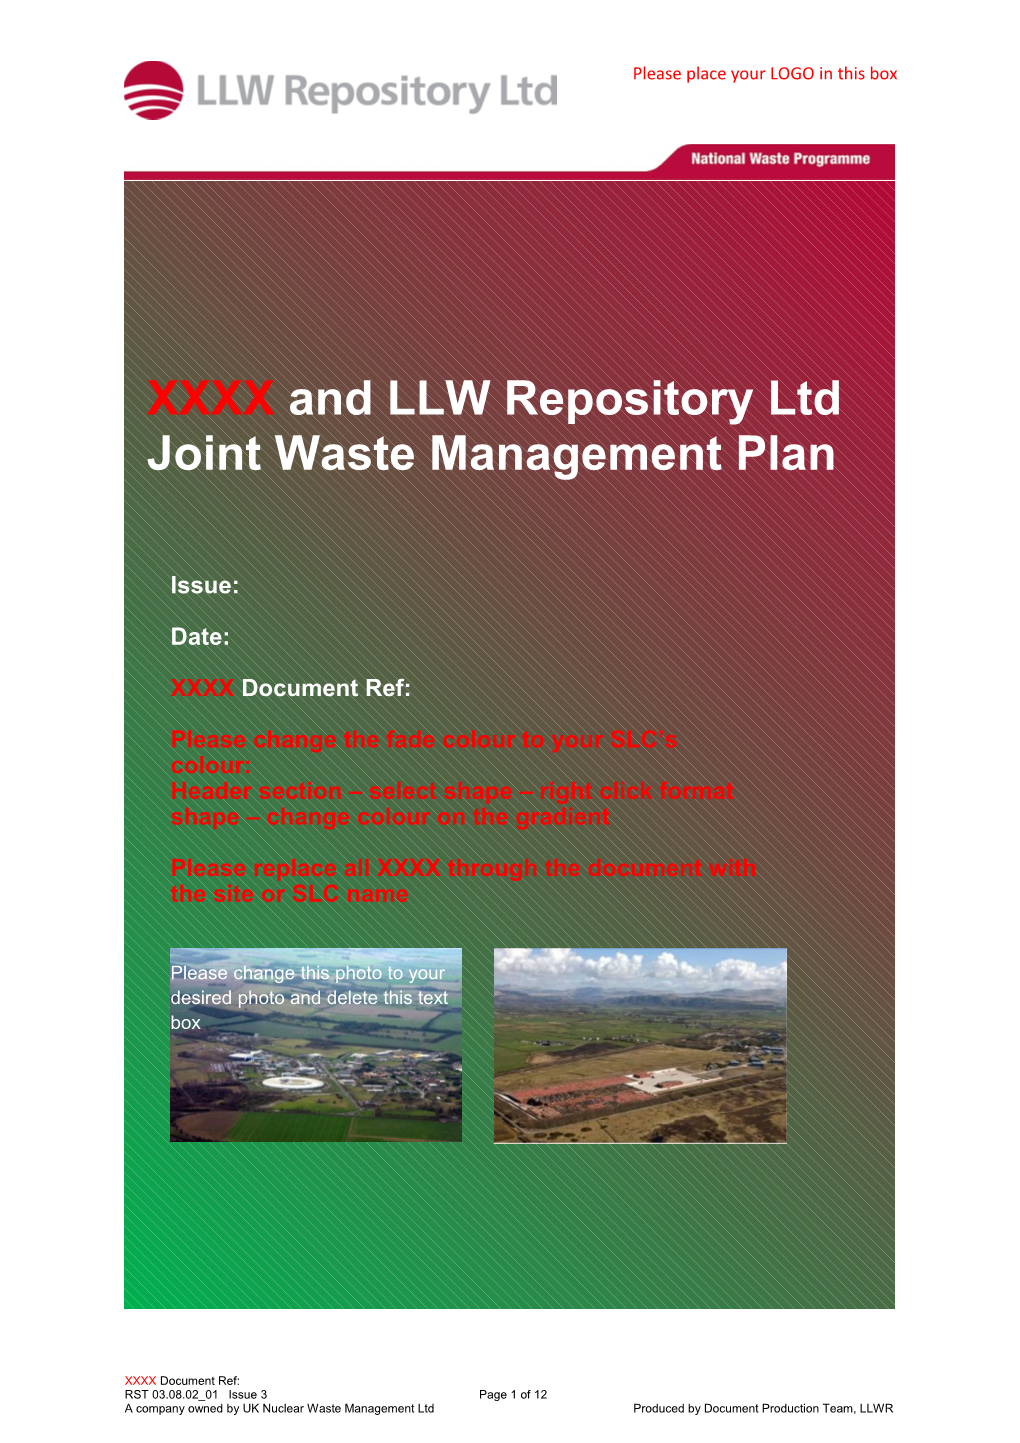 A Company Owned by UK Nuclear Waste Management Ltdproduced by Document Production Team, LLWR